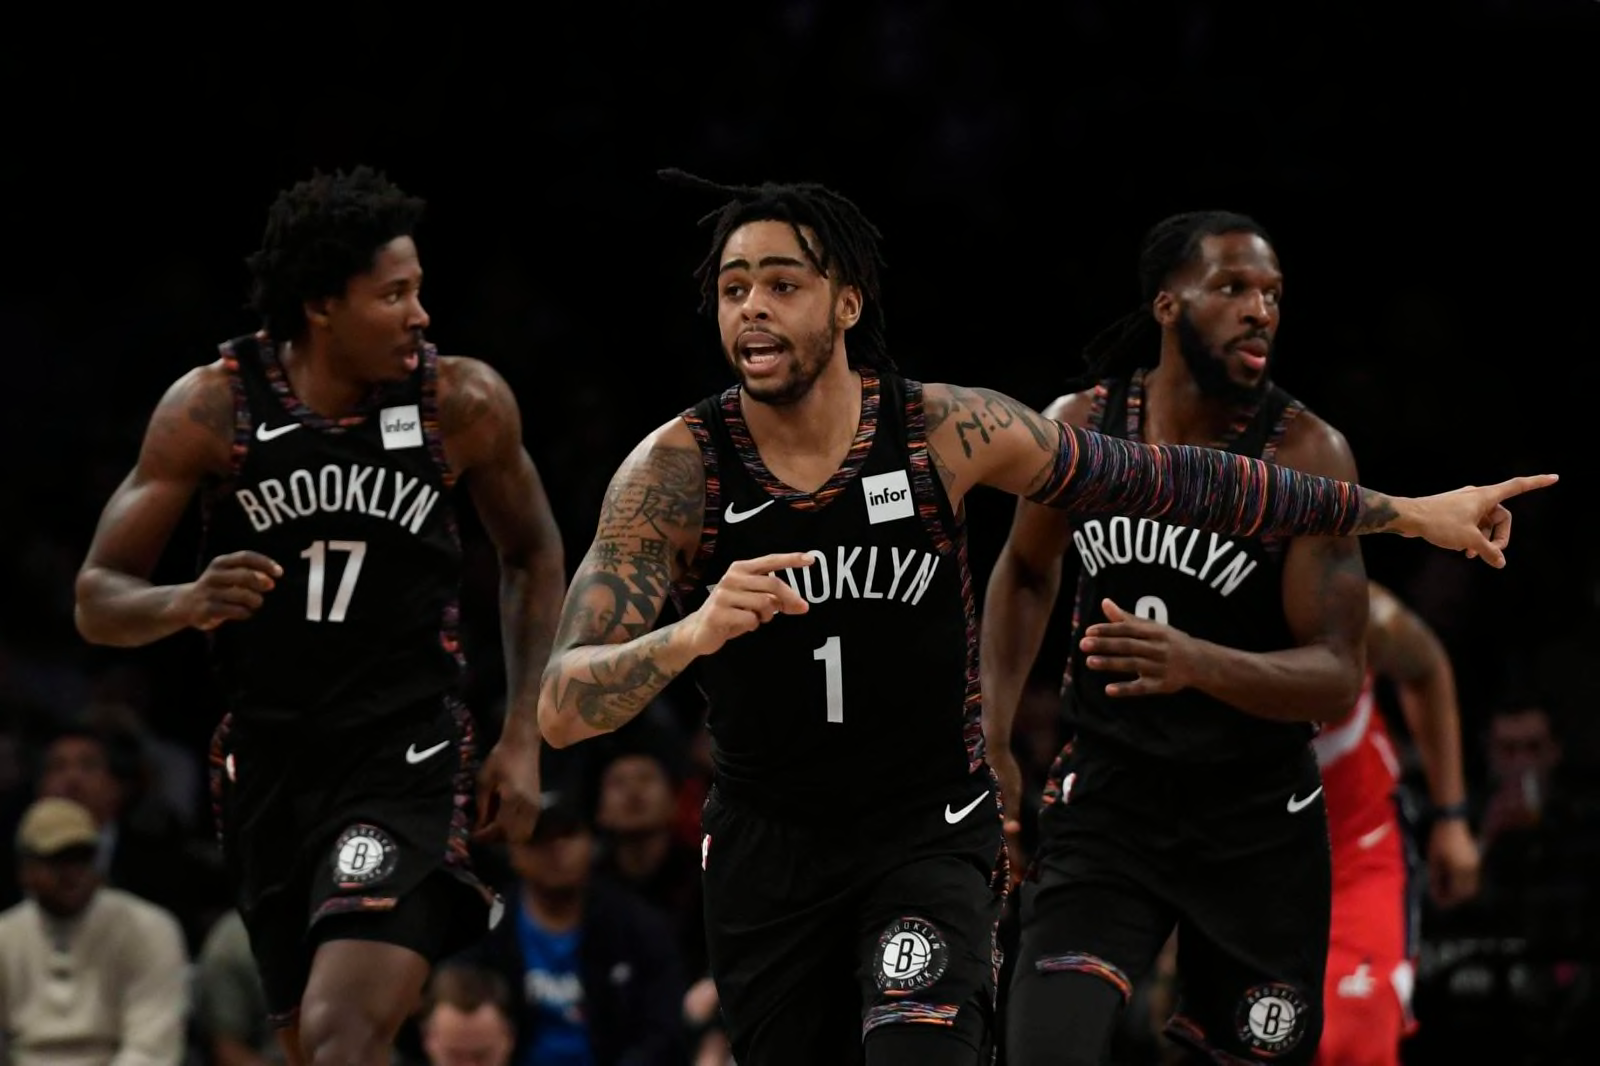 2019 Nba Draft Top 3 Players For Brooklyn Nets To Select With 17th Pick